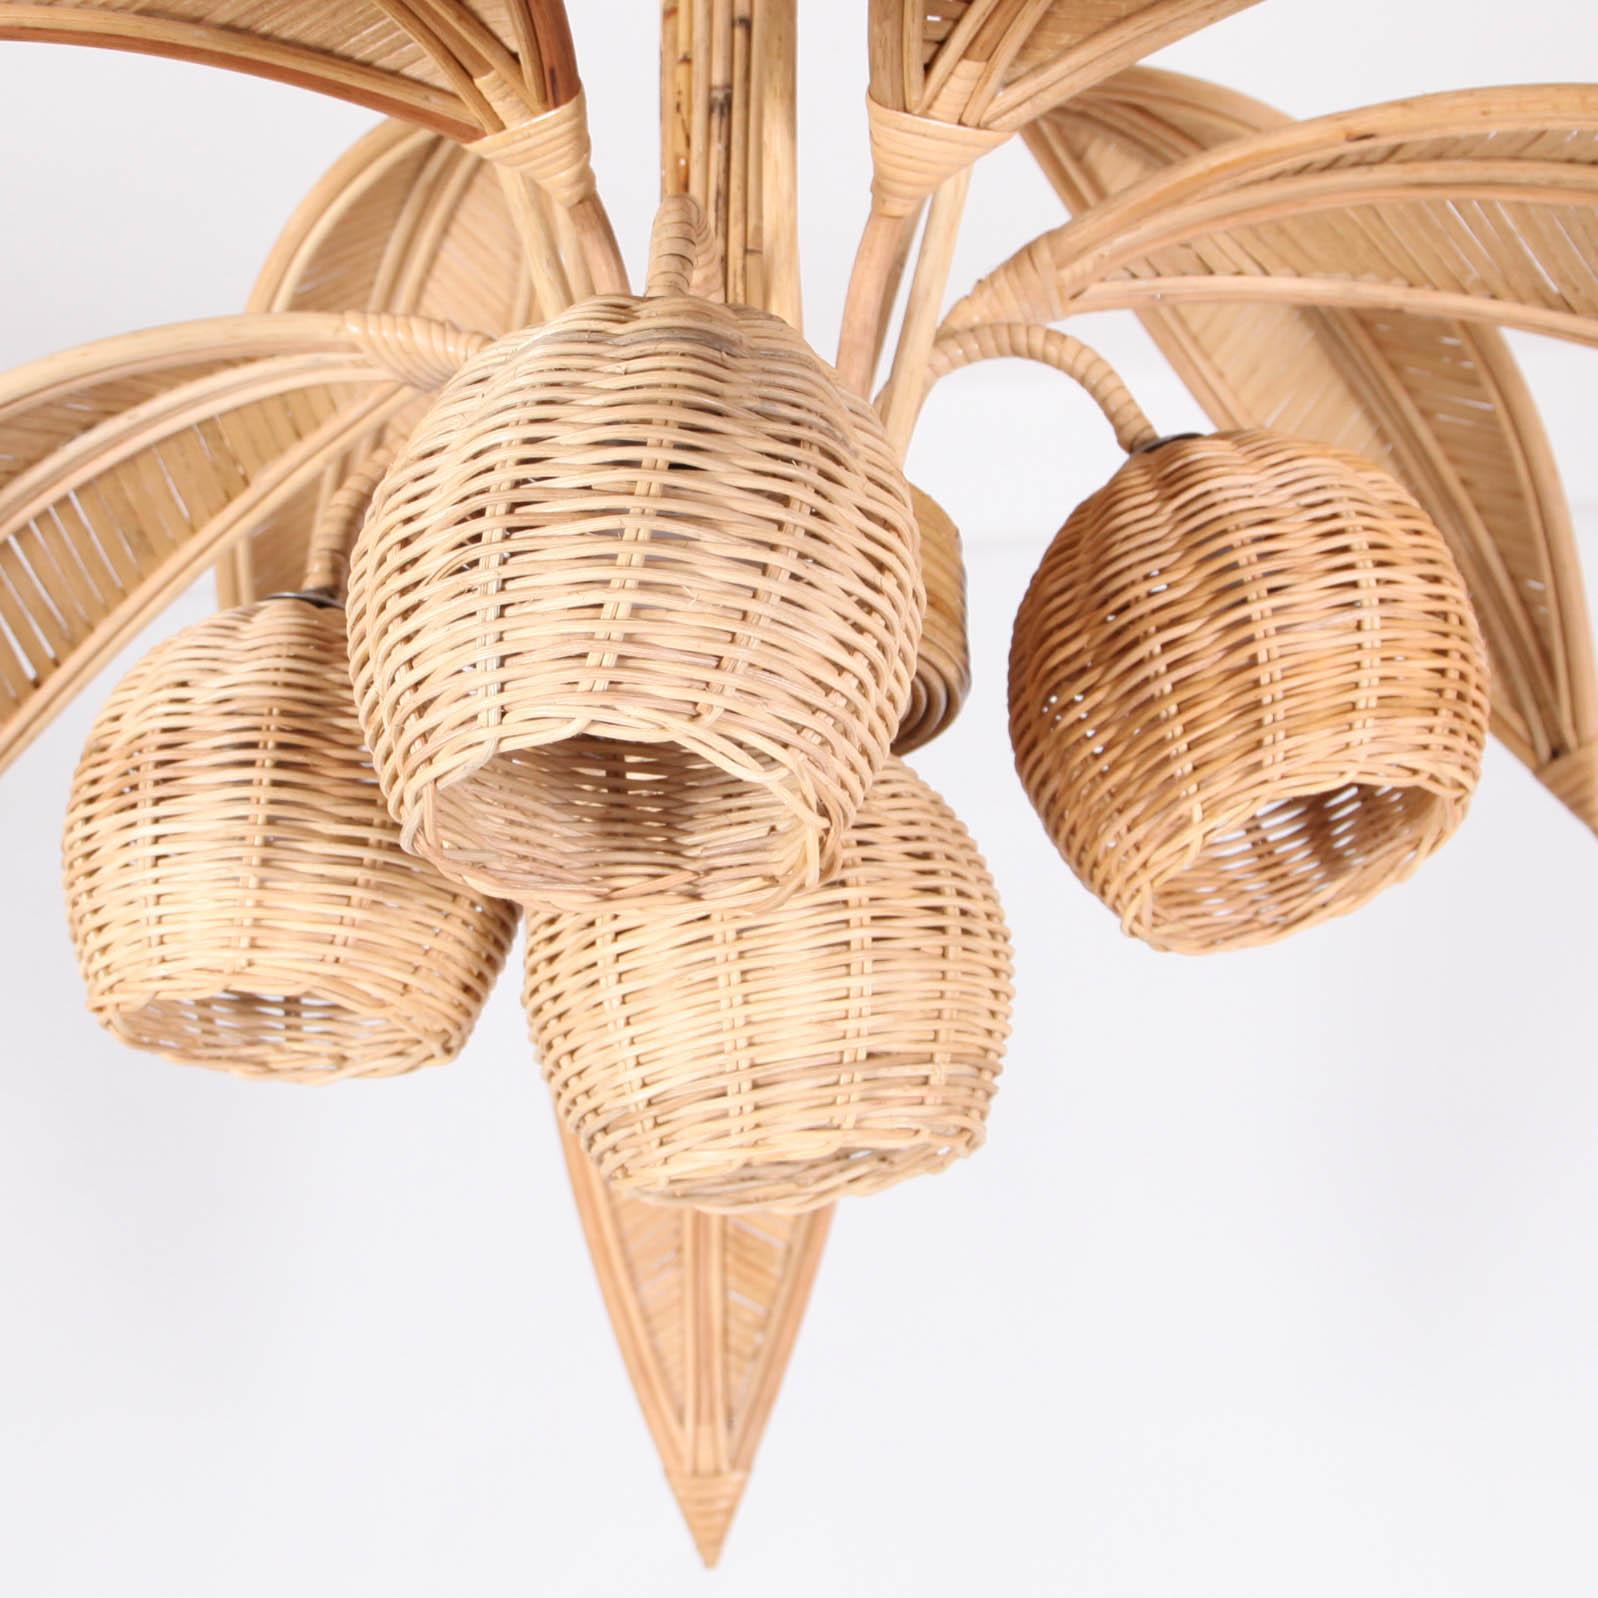 Beautiful hand made natural rattan pendant in coconut tree / palm tree shape. Real piece of art.